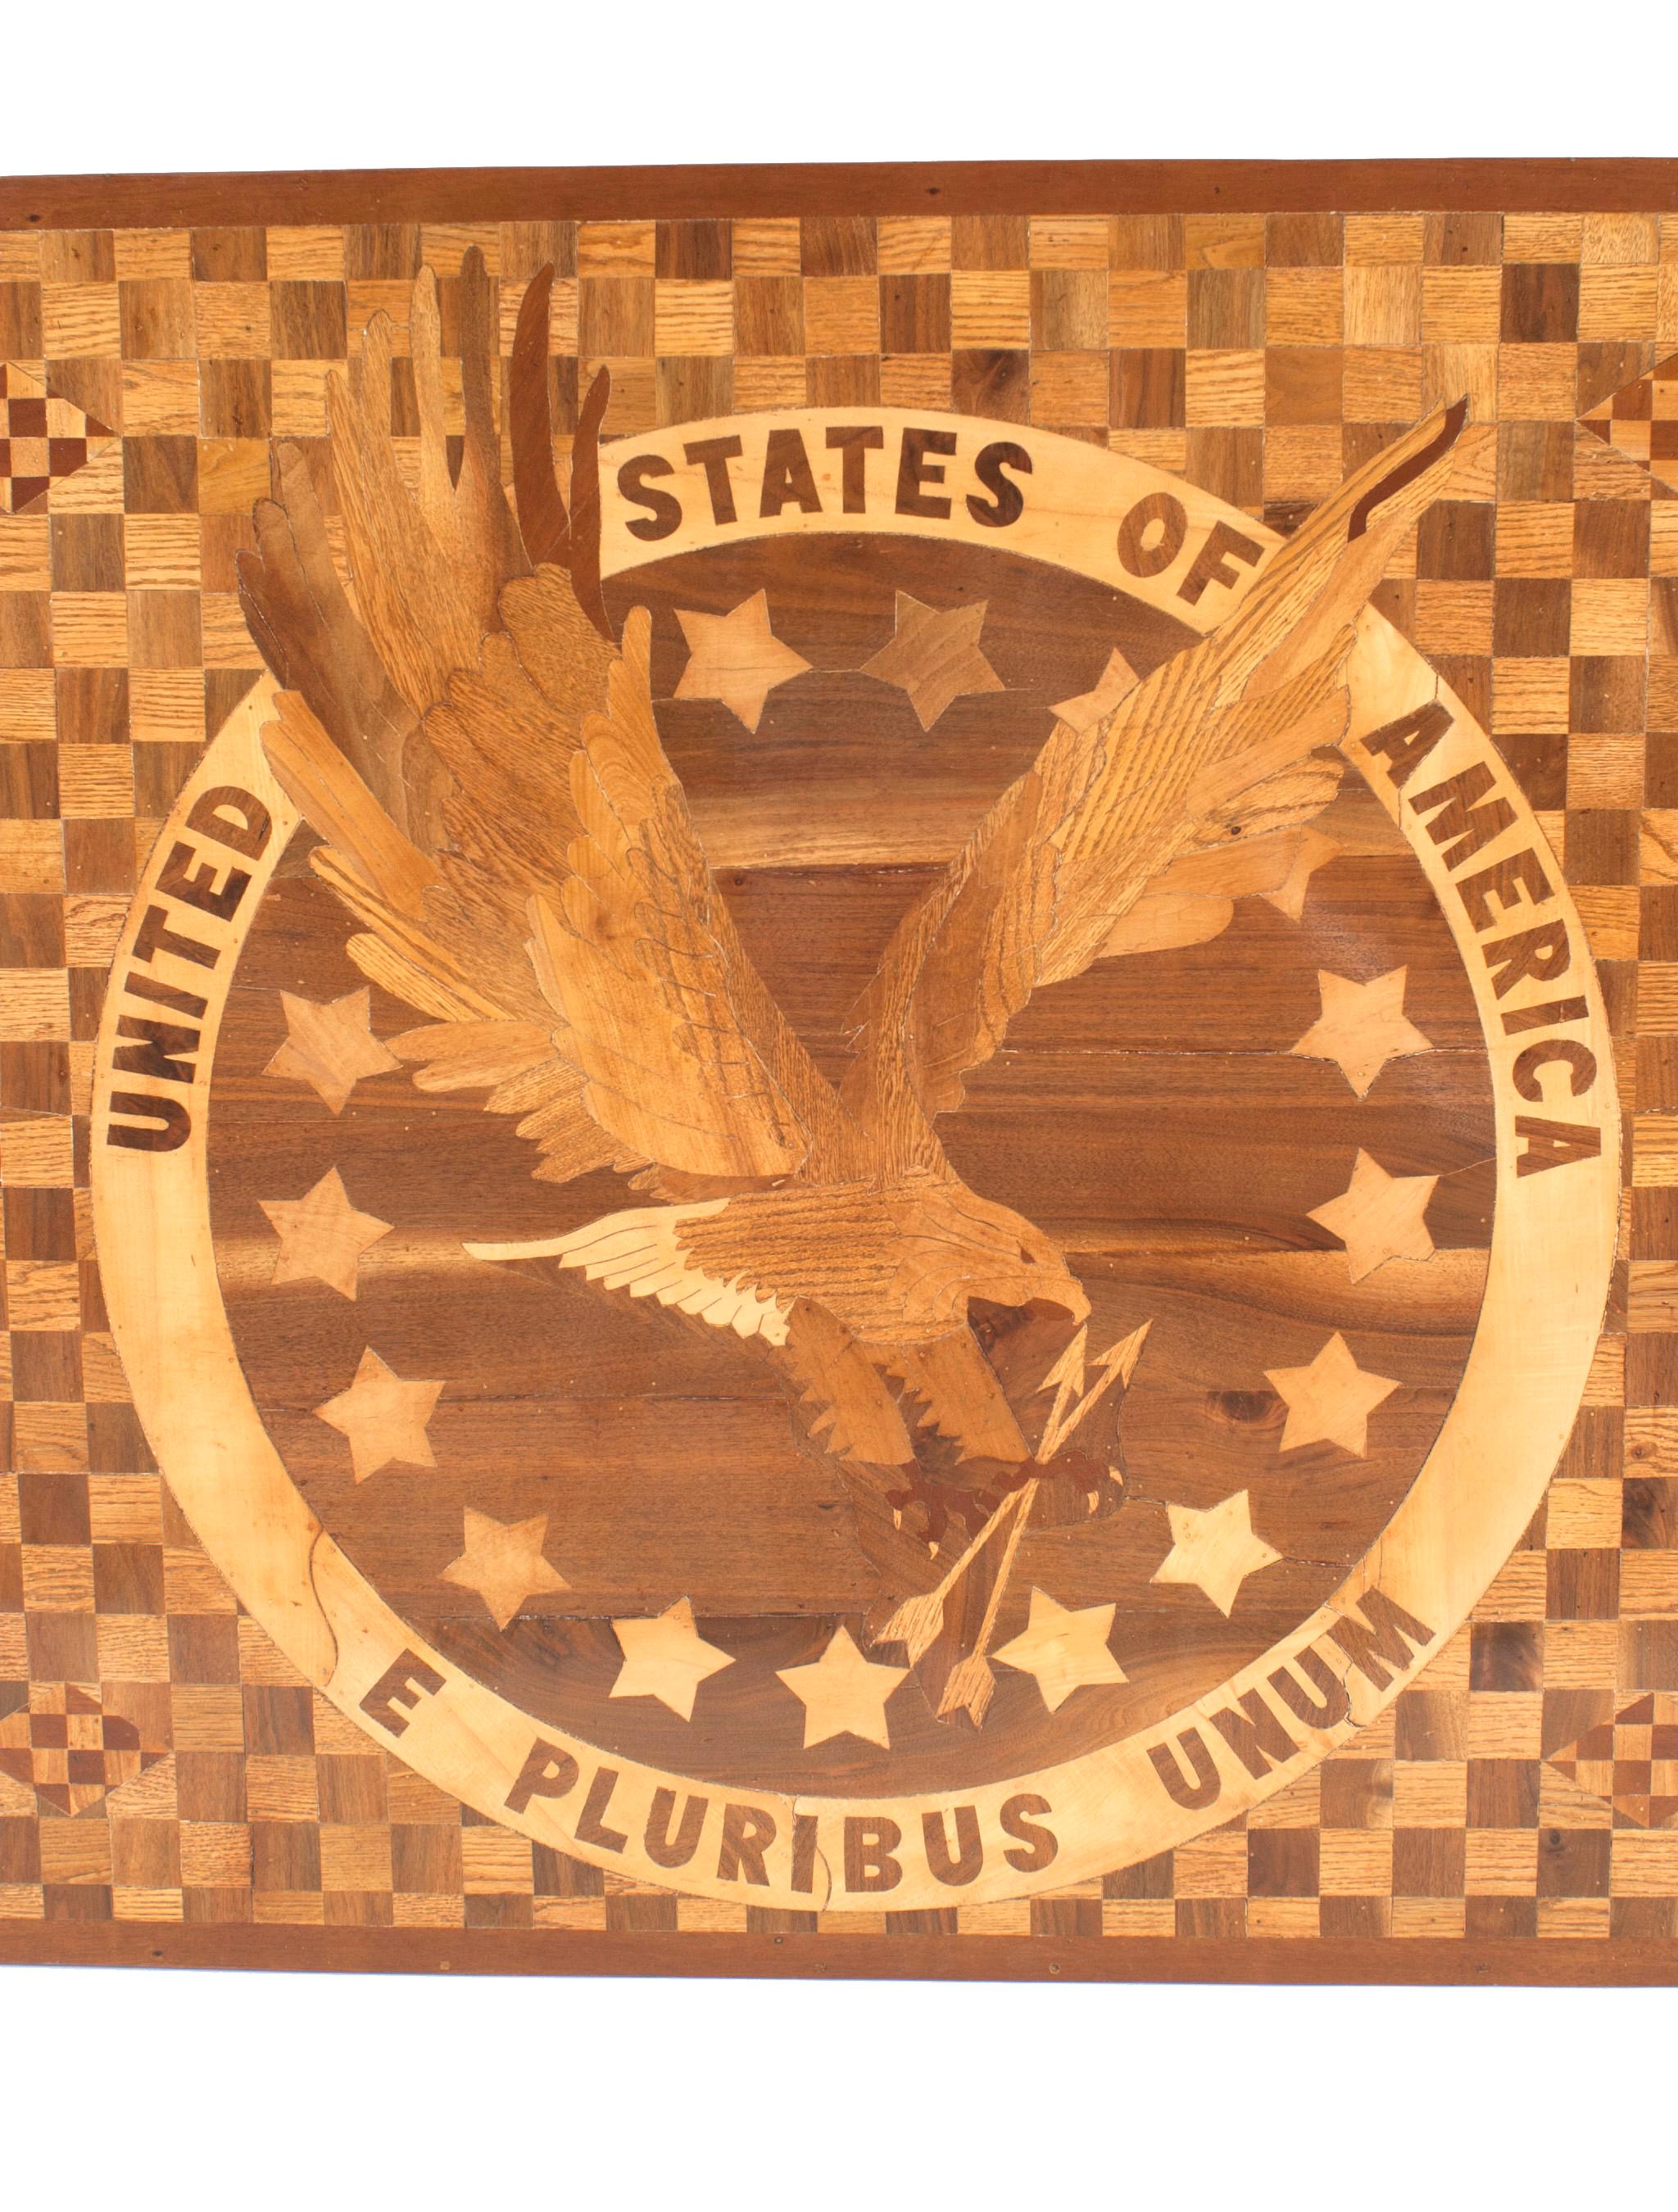 American Victorian (19th Century) inlaid panel from the flooring of the central rotunda of the California State Capital in Sacramento showing the seal of the United States ( Related items: REG3884A, REG3884B).
